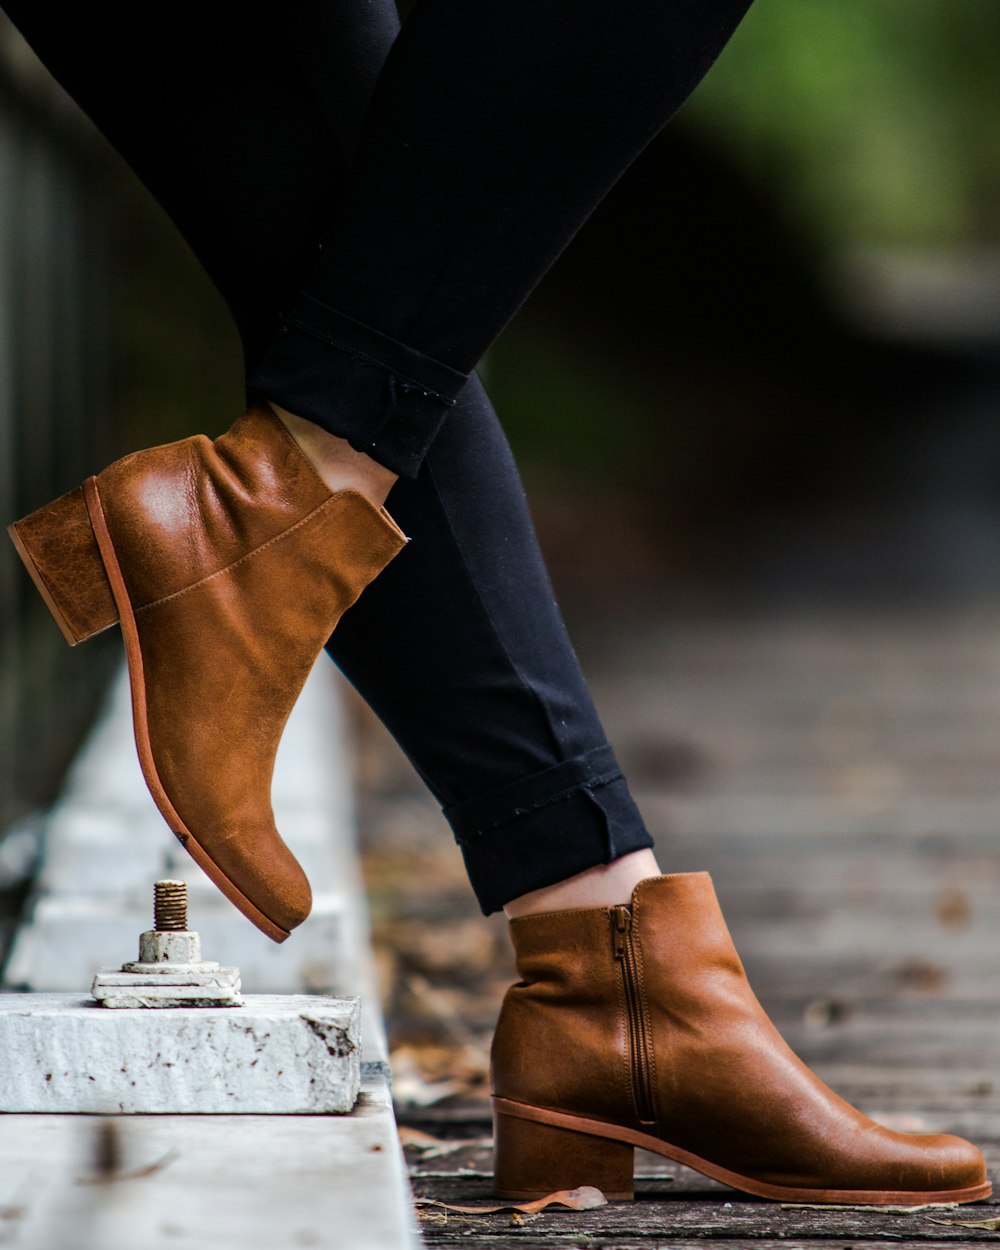 Woman Shoes Pictures | Download Free Images on Unsplash